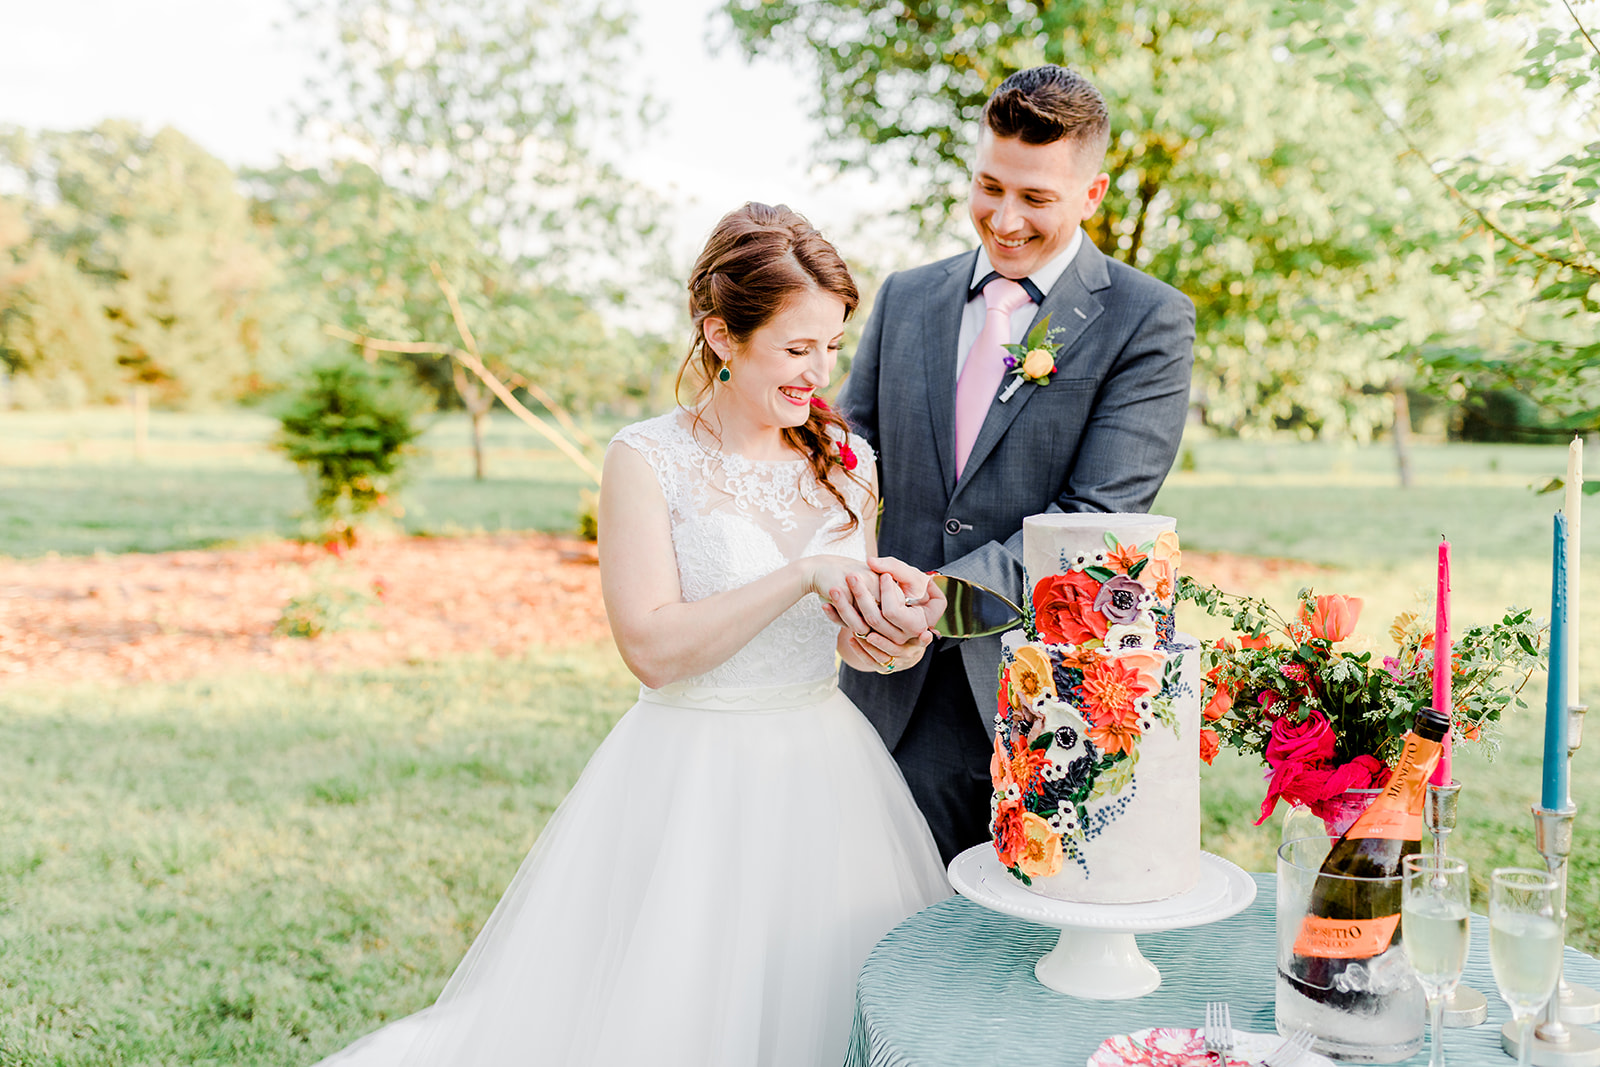 Bright + Cheerful Garden Elegance of Artmosphere — the bride + groom cutting into a 10 Blooms Cakes masterpiece